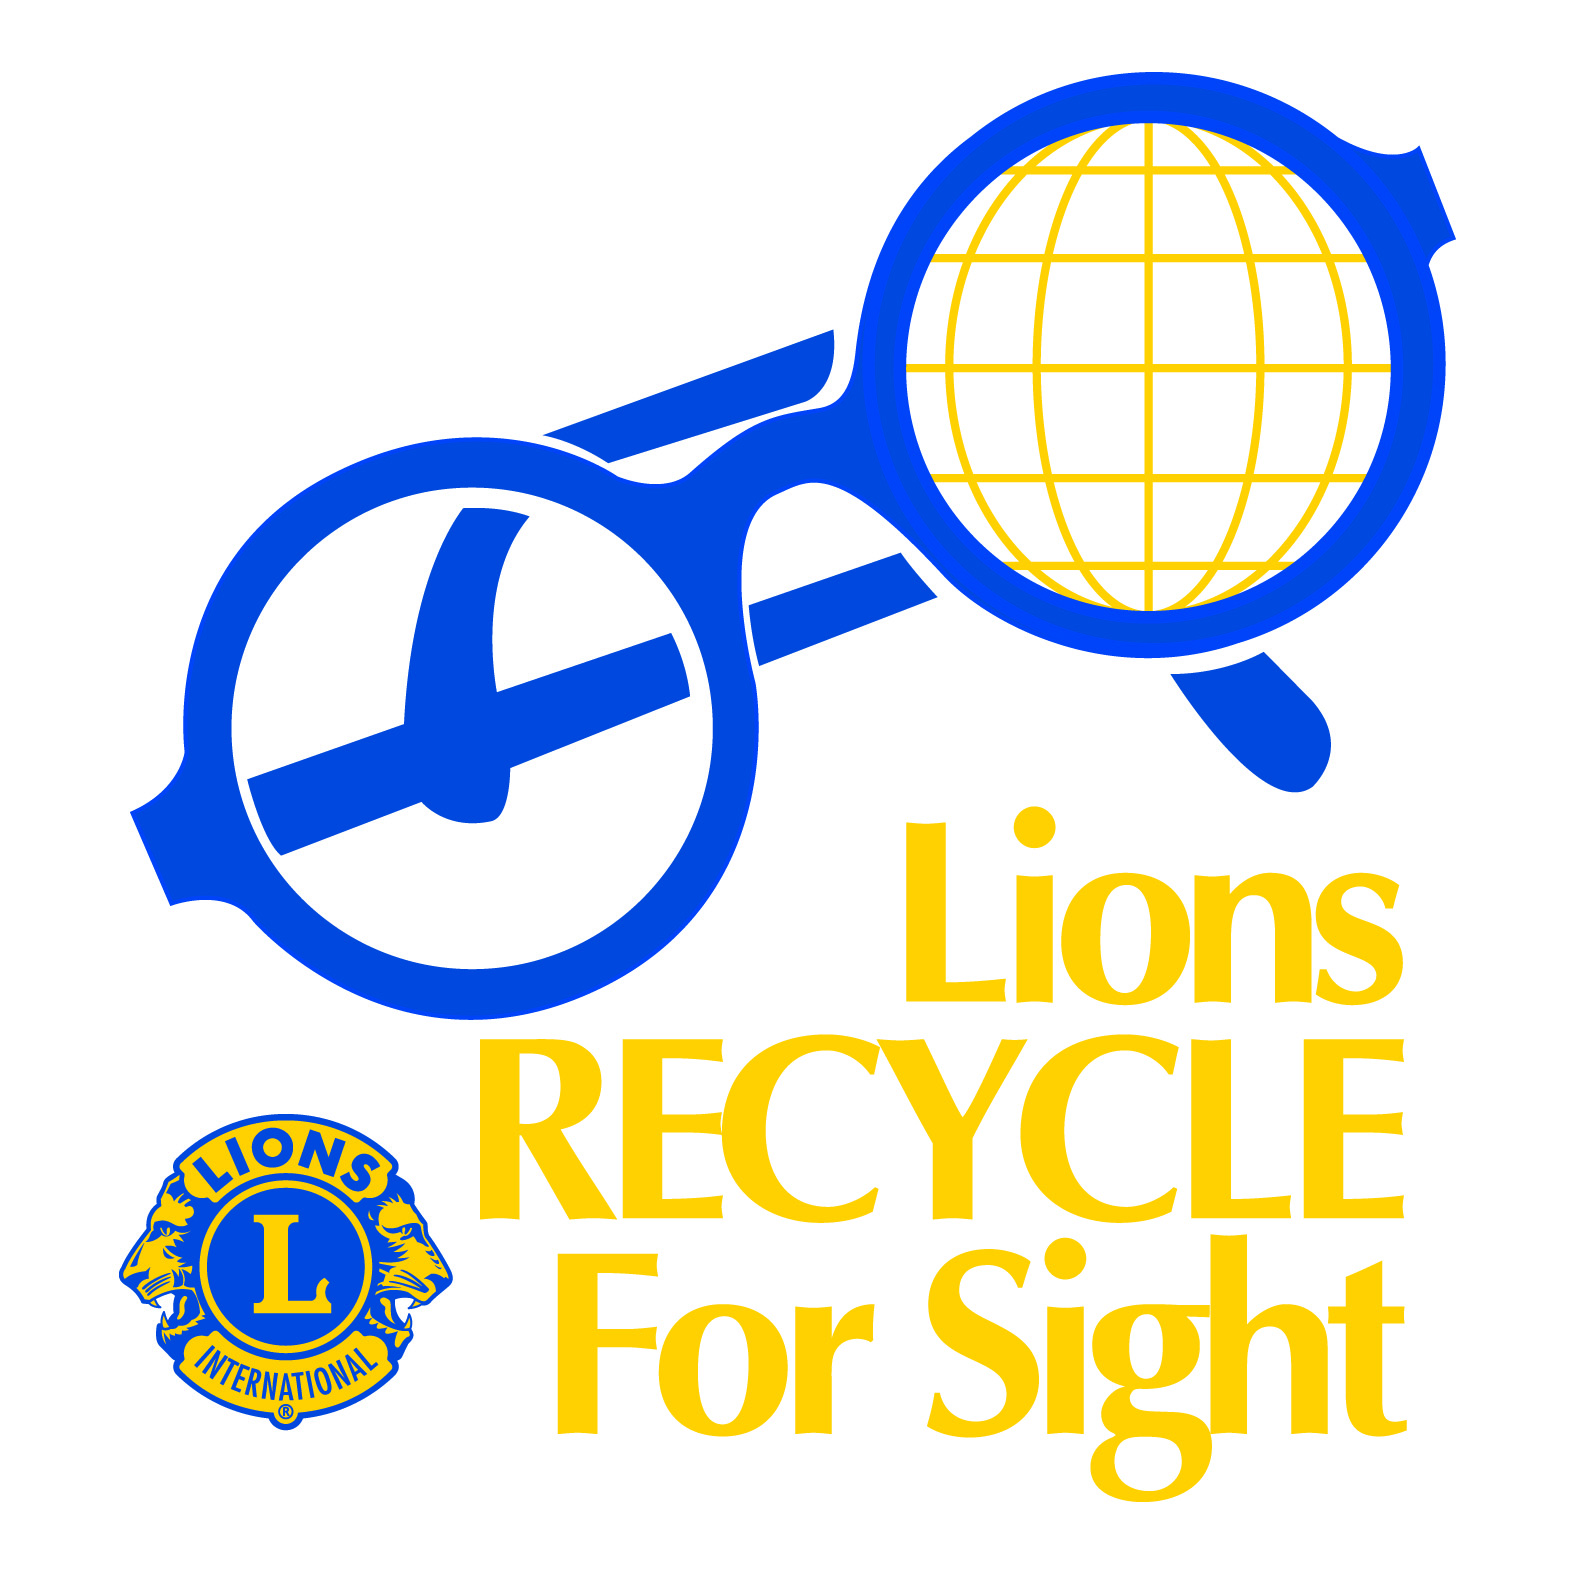 Bairnsdale Lions Recycle for sight